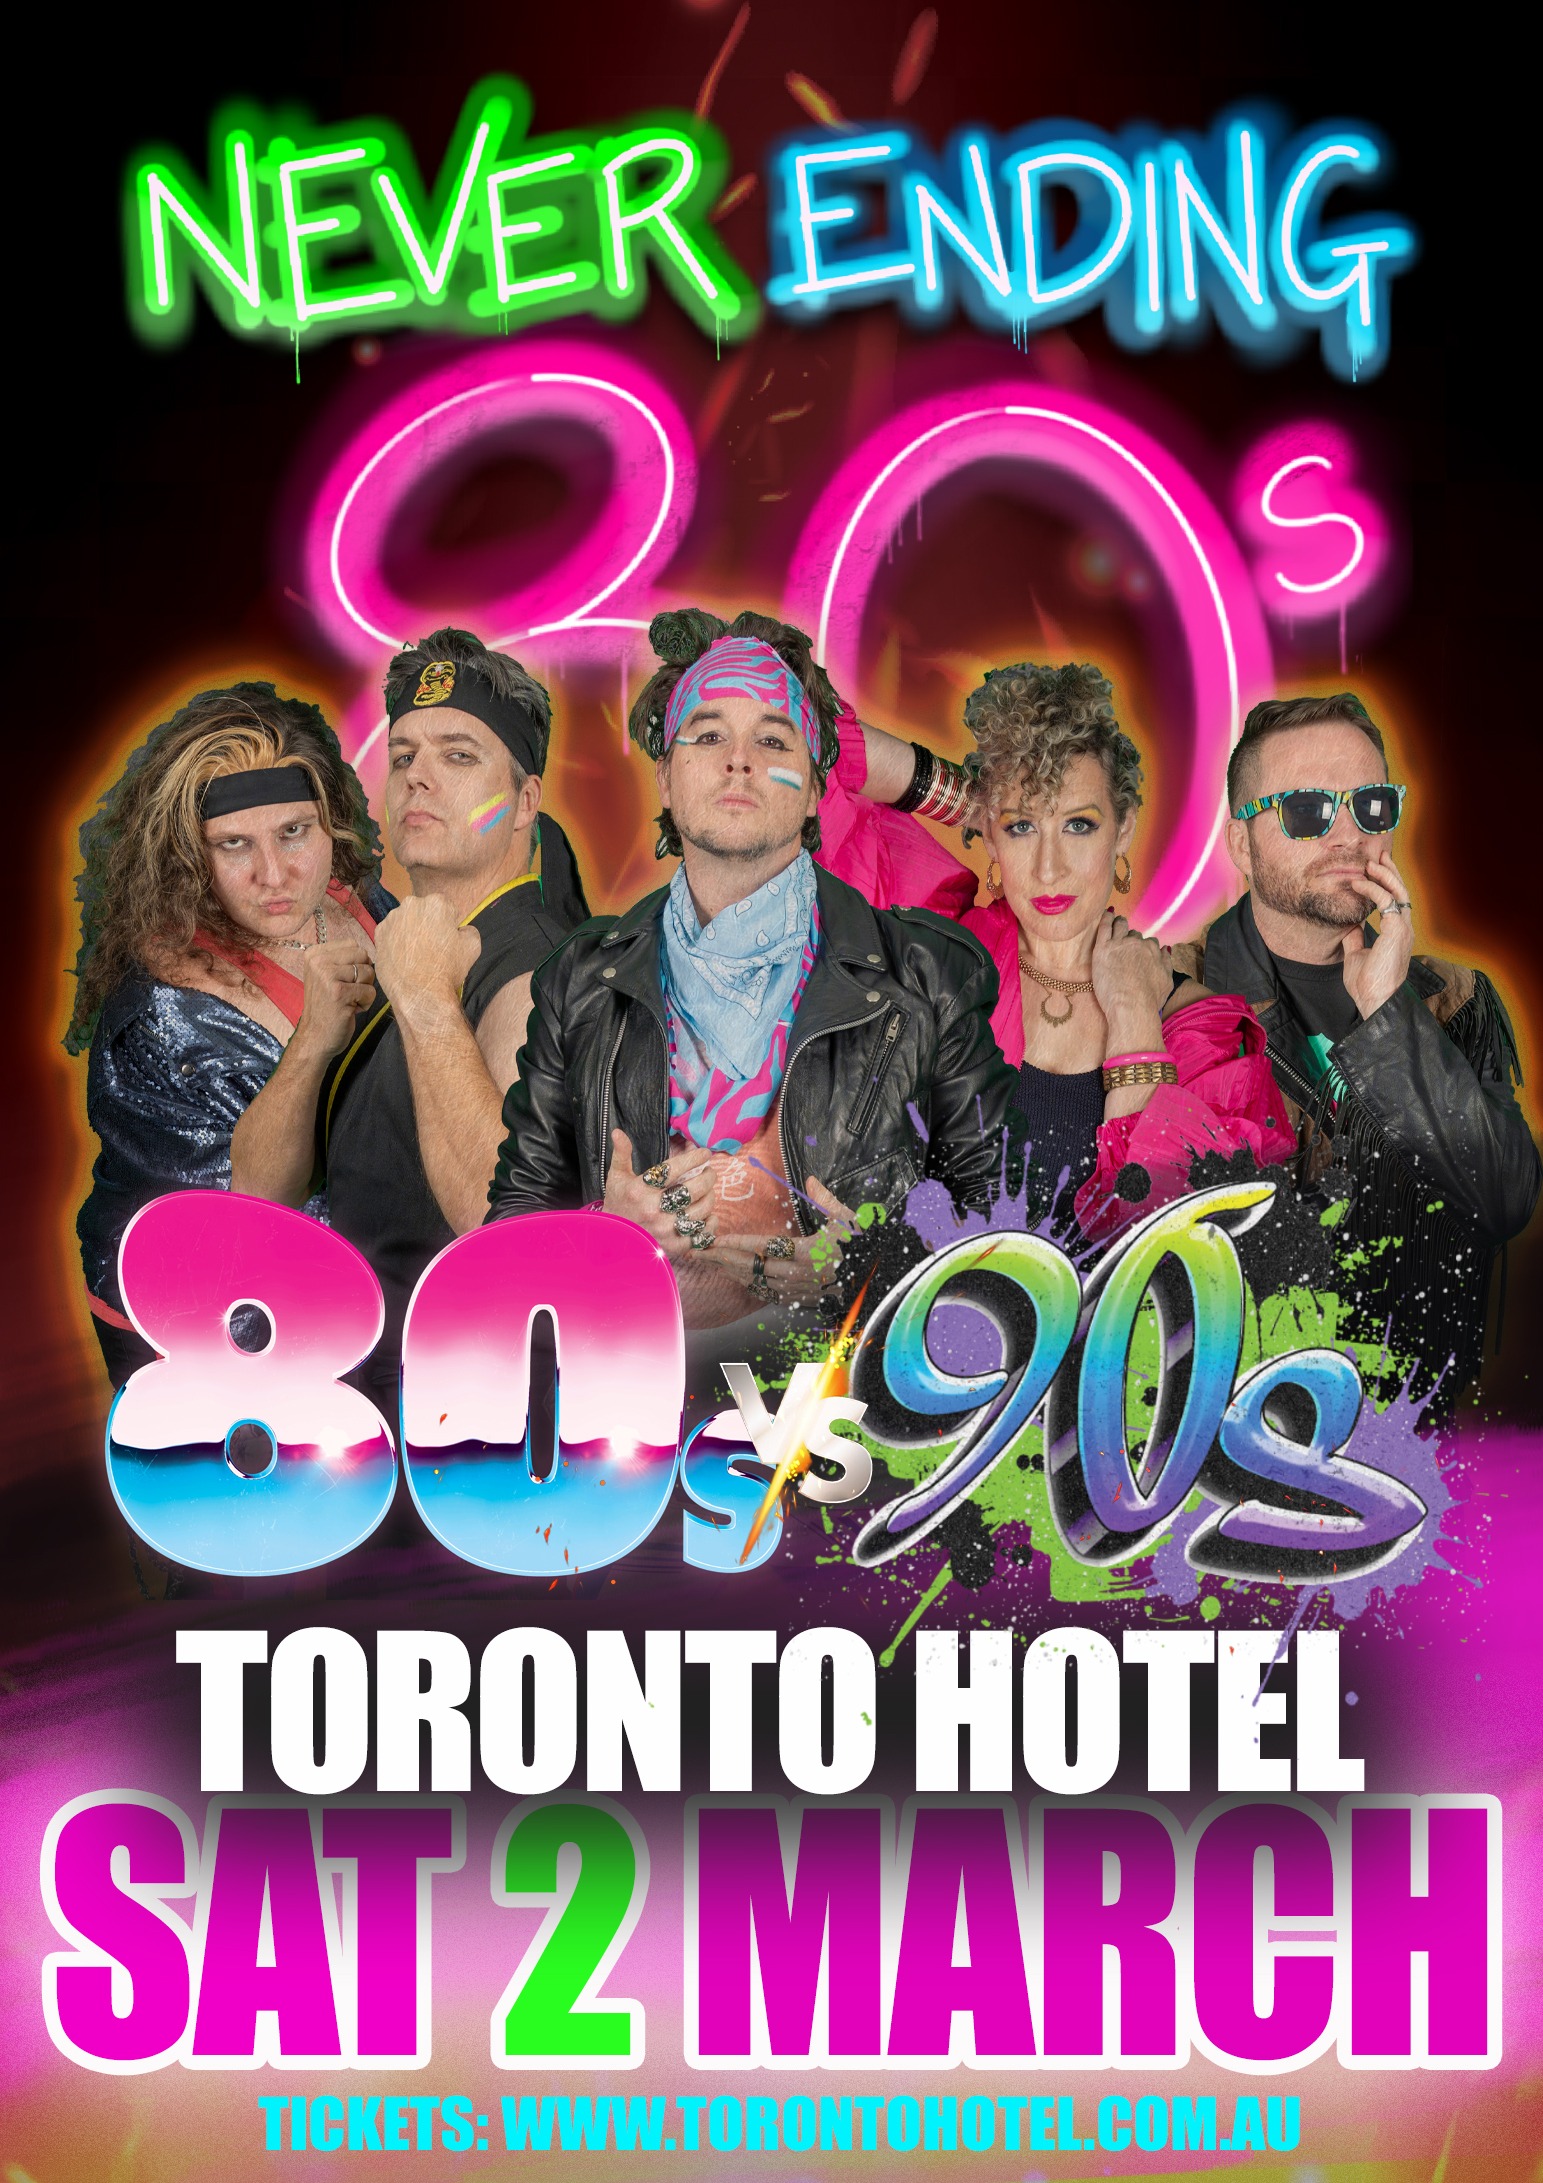 Never Ending 80s – 80s v 90s The Battle Of The Decades! Tickets, Toronto  Hotel, Toronto